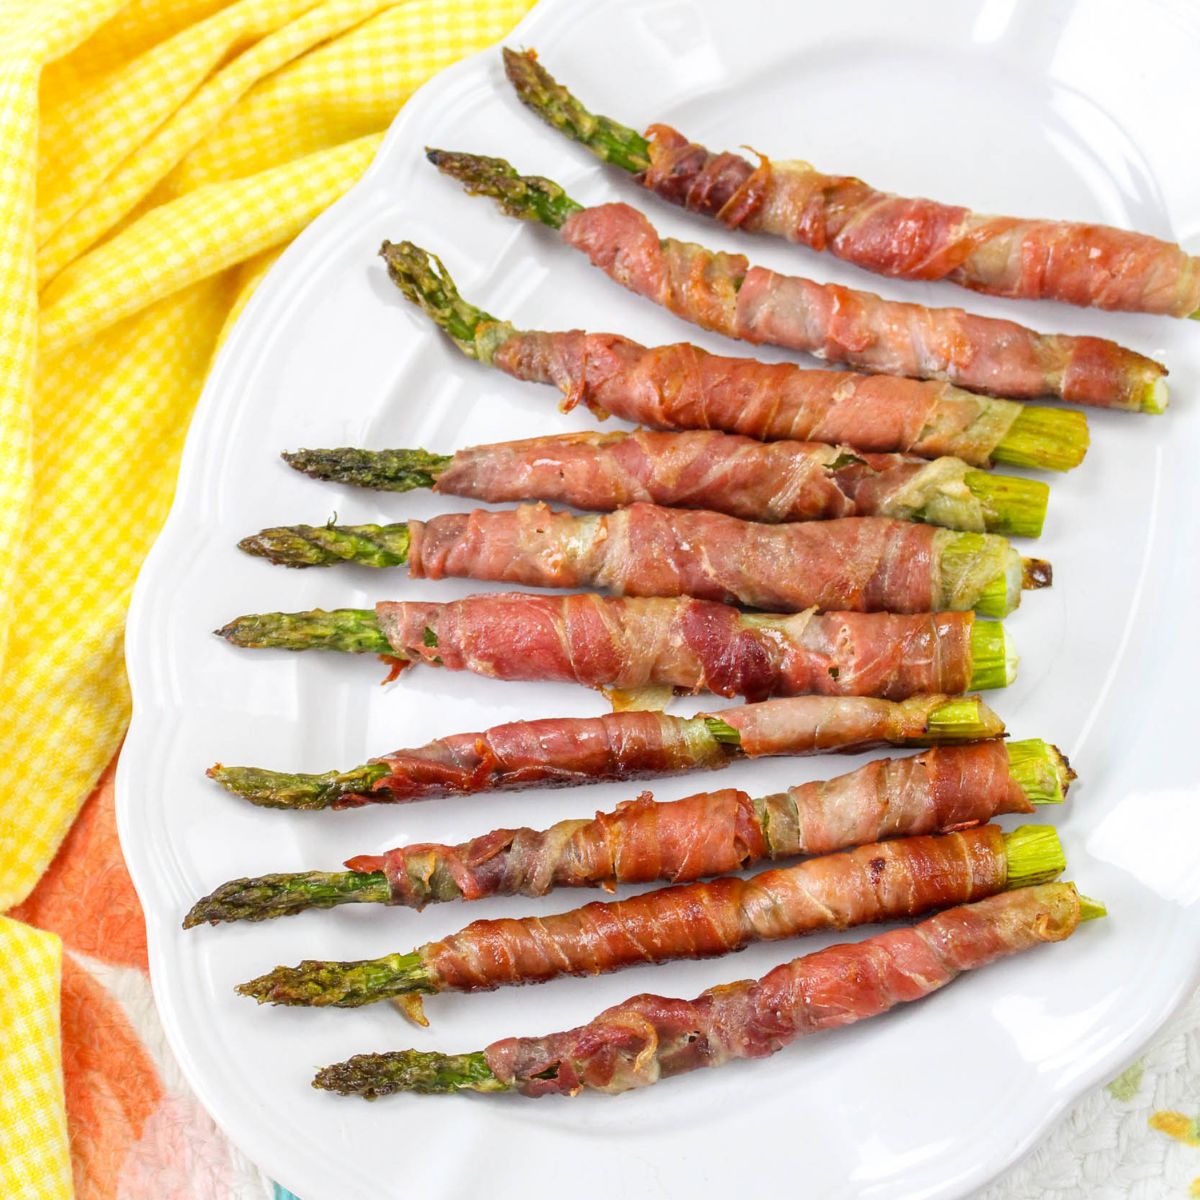 Asparagus wrapped in bacon on a white plate.